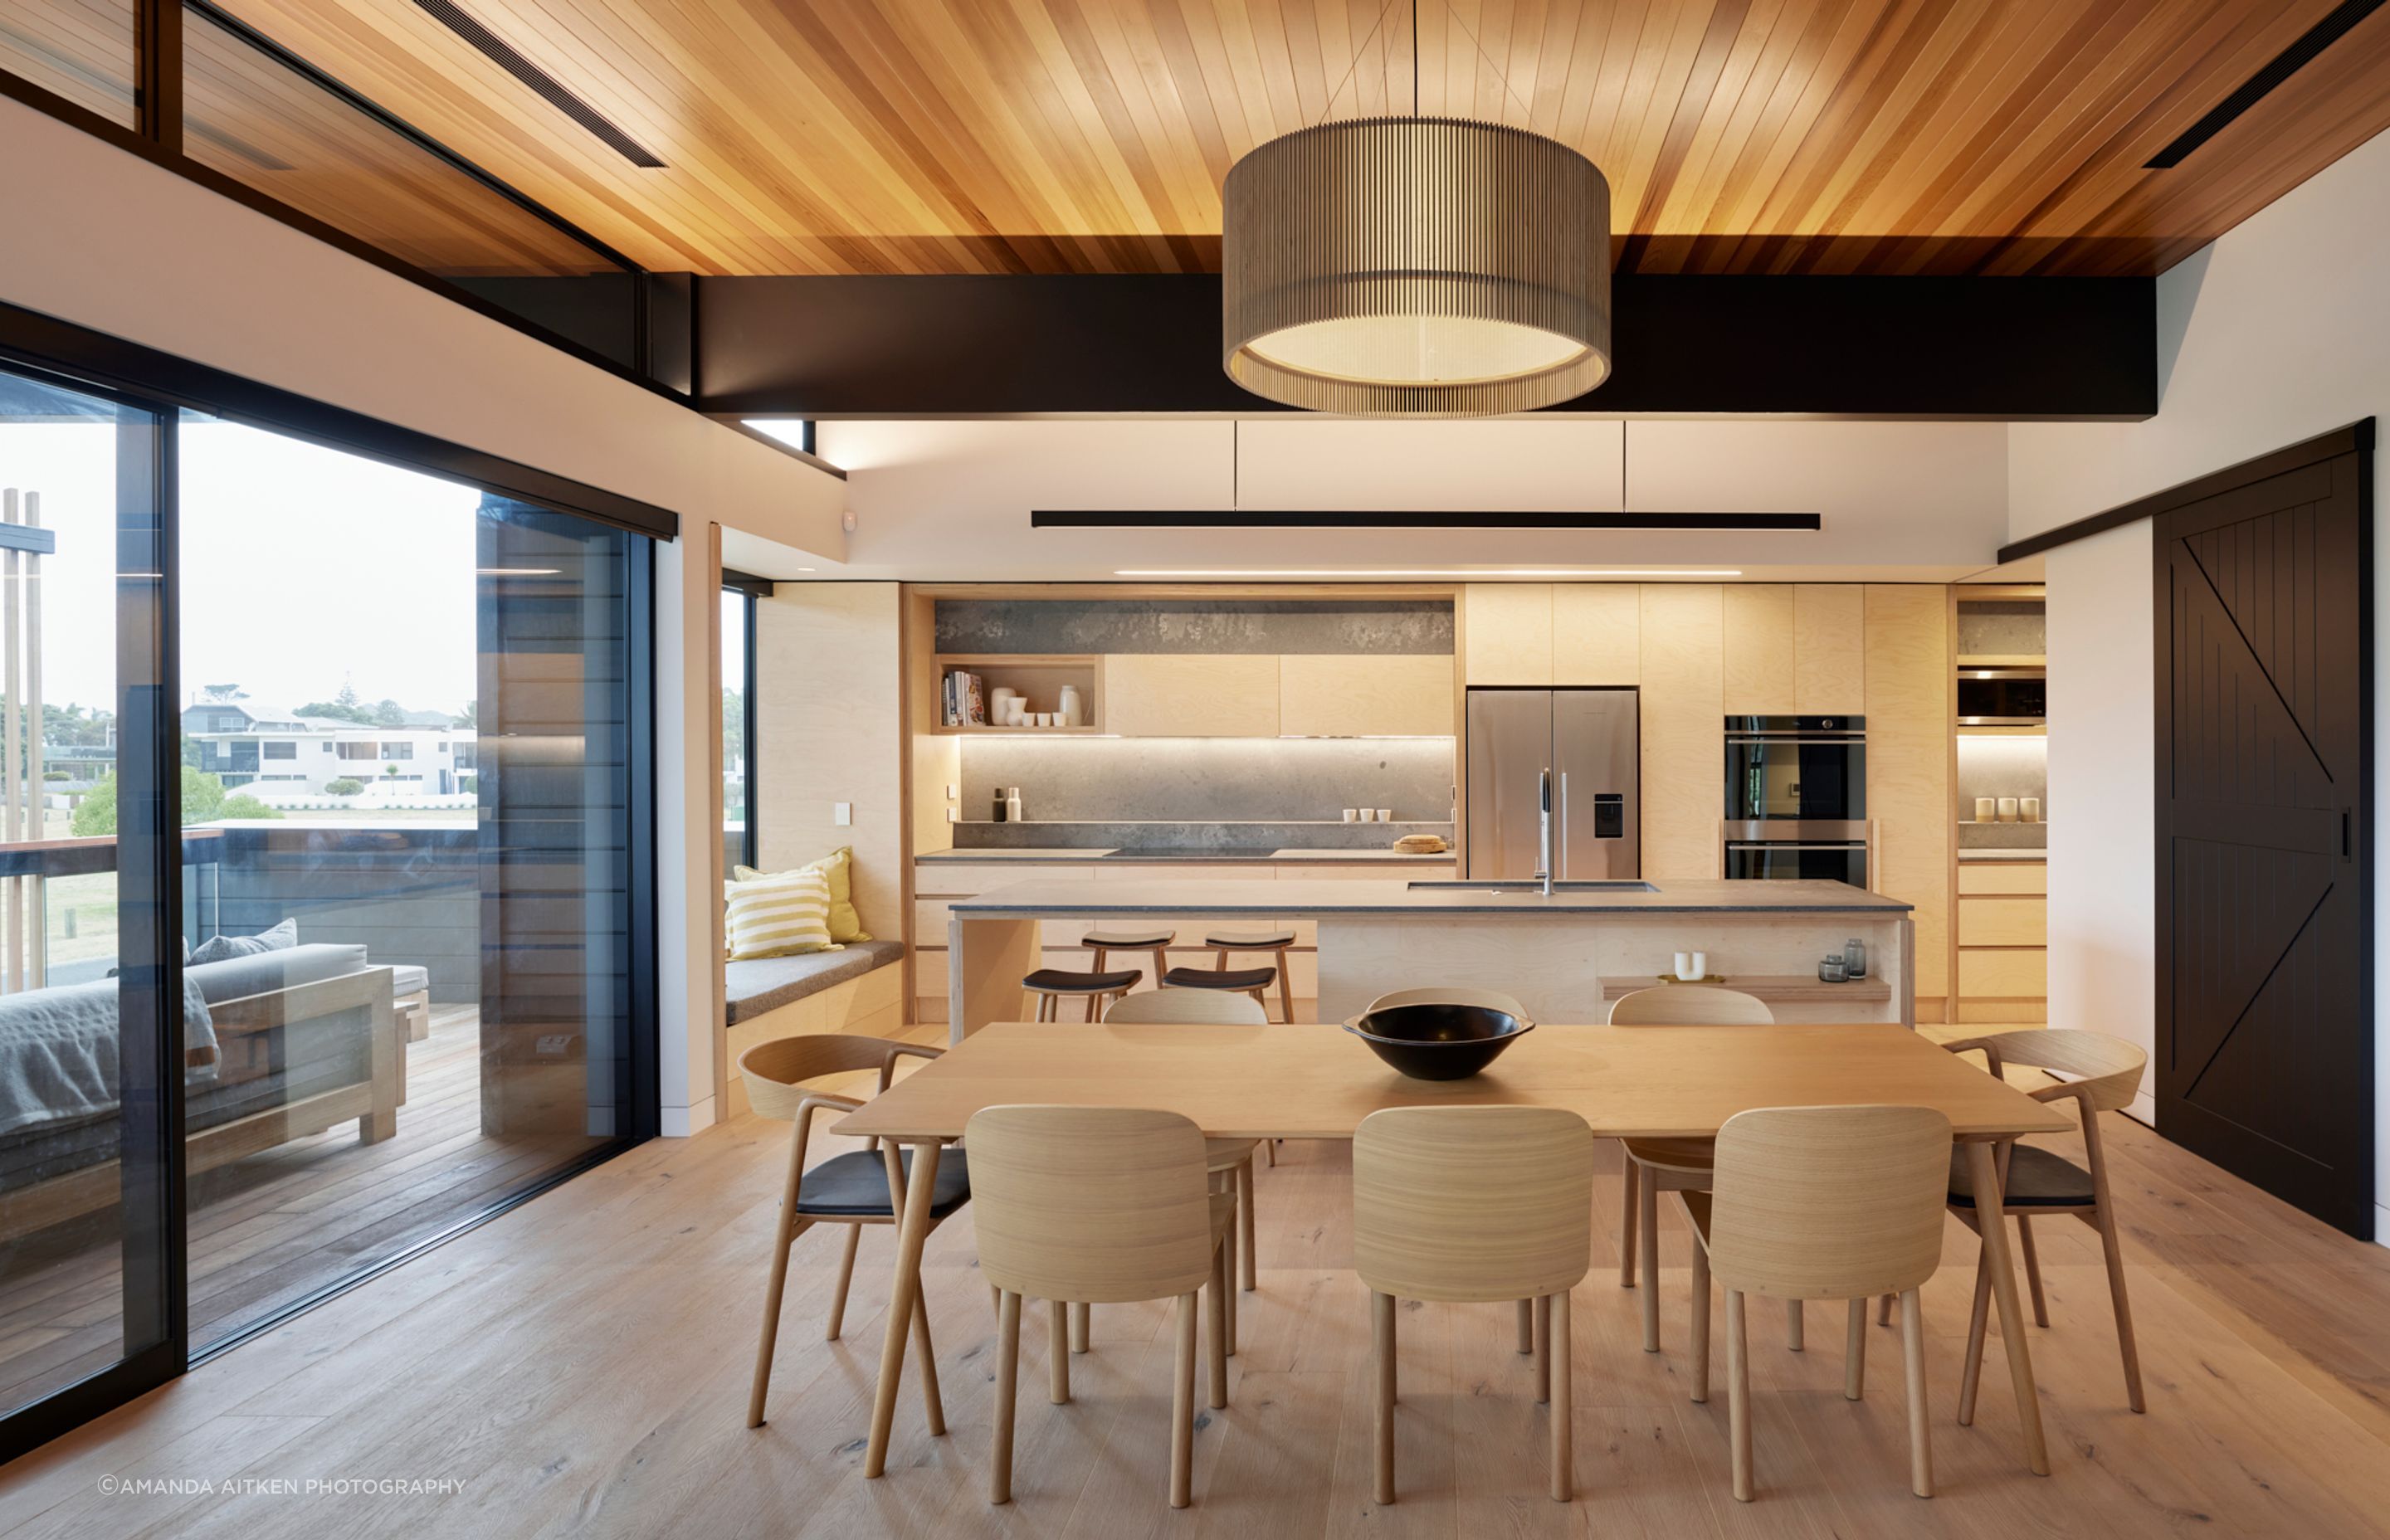 The plywood kitchen finishes and the barn-door style were chosen to keep to a relaxed beachside feel.